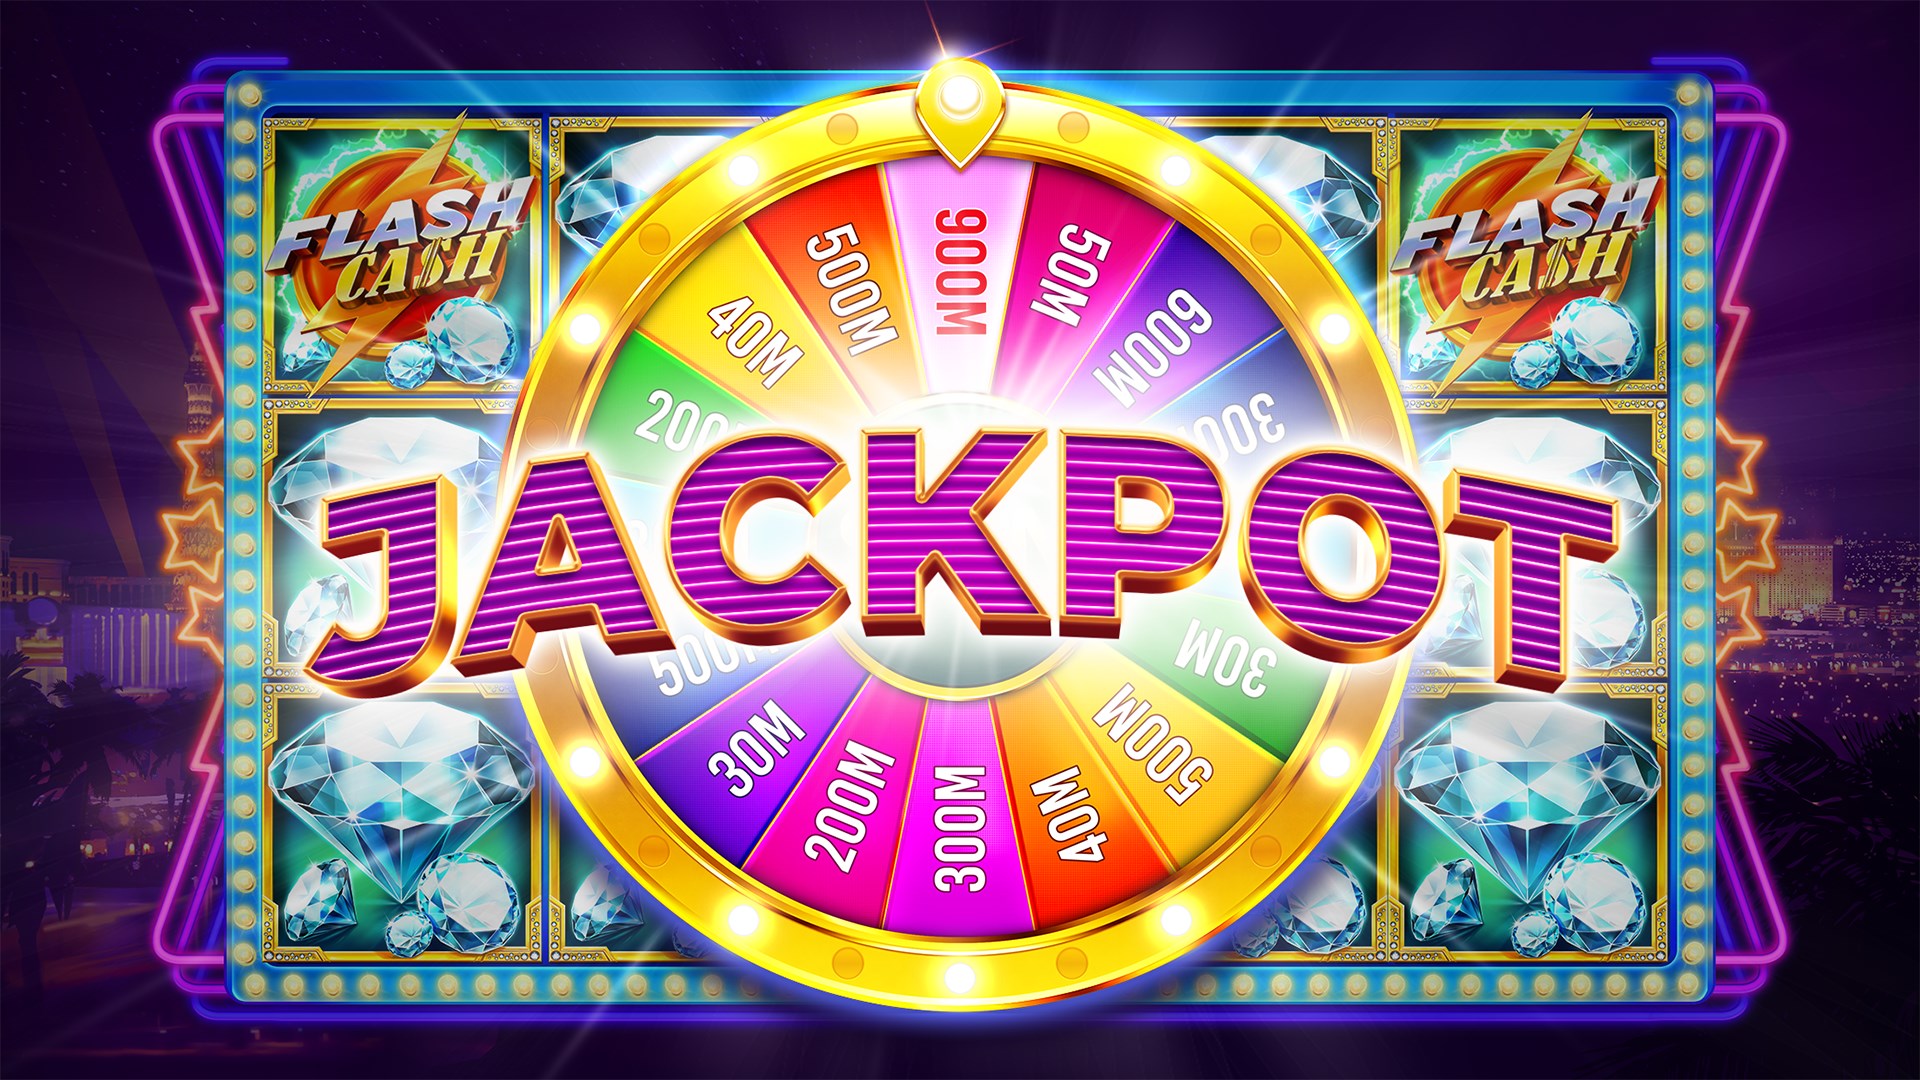 Read more about the article Online Slot Machines<div class="yasr-vv-stars-title-container"><div class='yasr-stars-title yasr-rater-stars'
                          id='yasr-visitor-votes-readonly-rater-36eaf0fbd561d'
                          data-rating='0'
                          data-rater-starsize='16'
                          data-rater-postid='2458'
                          data-rater-readonly='true'
                          data-readonly-attribute='true'
                      ></div><span class='yasr-stars-title-average'>0 (0)</span></div>